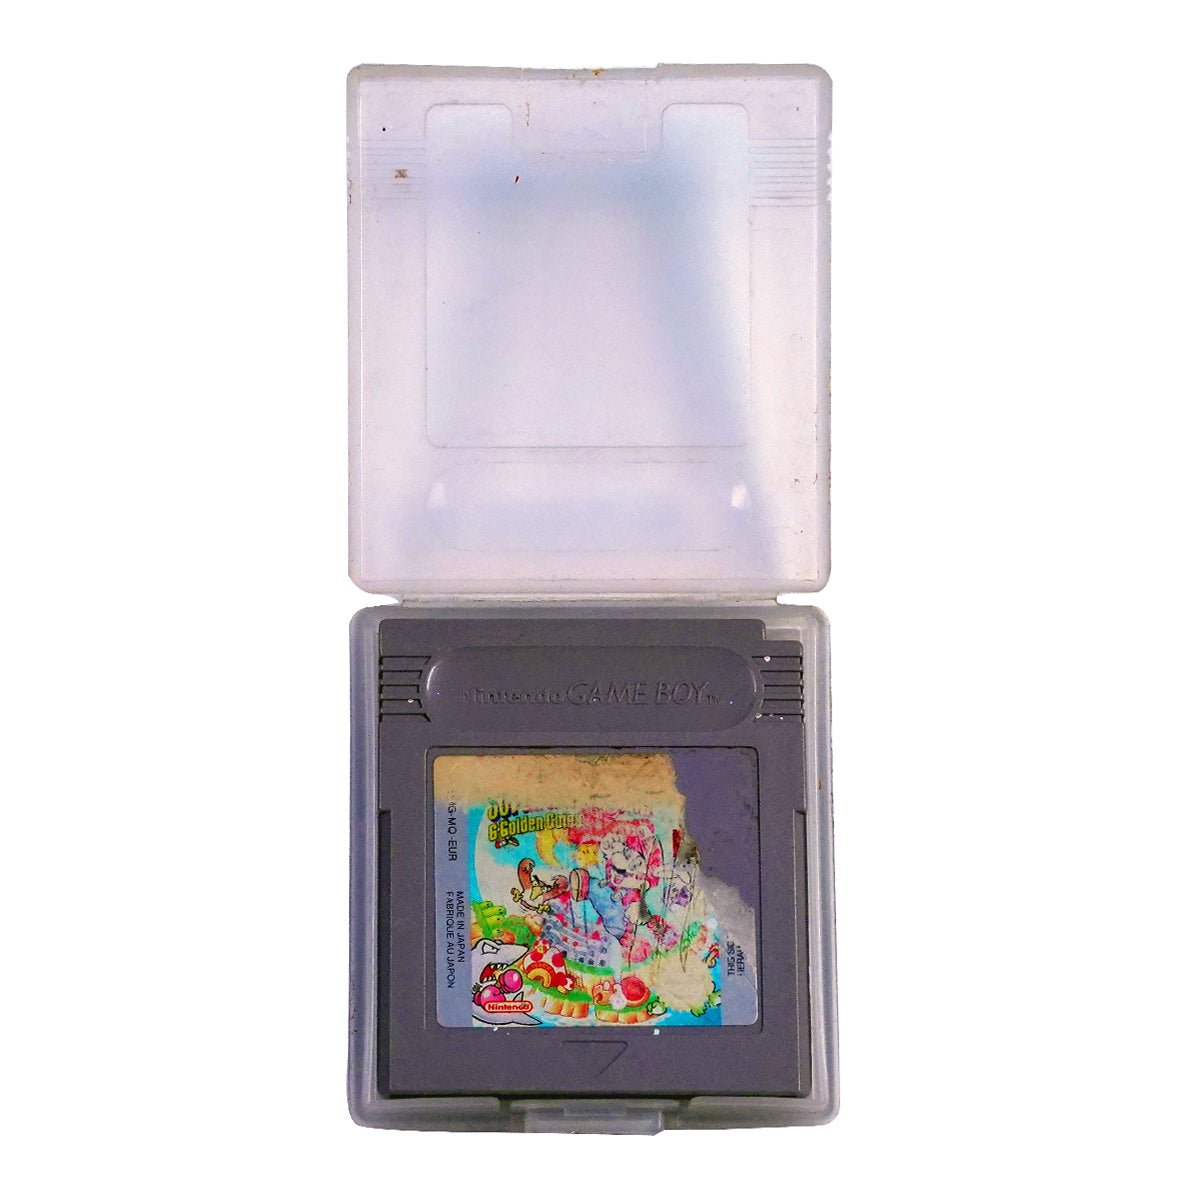 (Pre-Owned) Super Mario Land 6 Golden Coins - Gameboy Classic Game - ريترو - Store 974 | ستور ٩٧٤